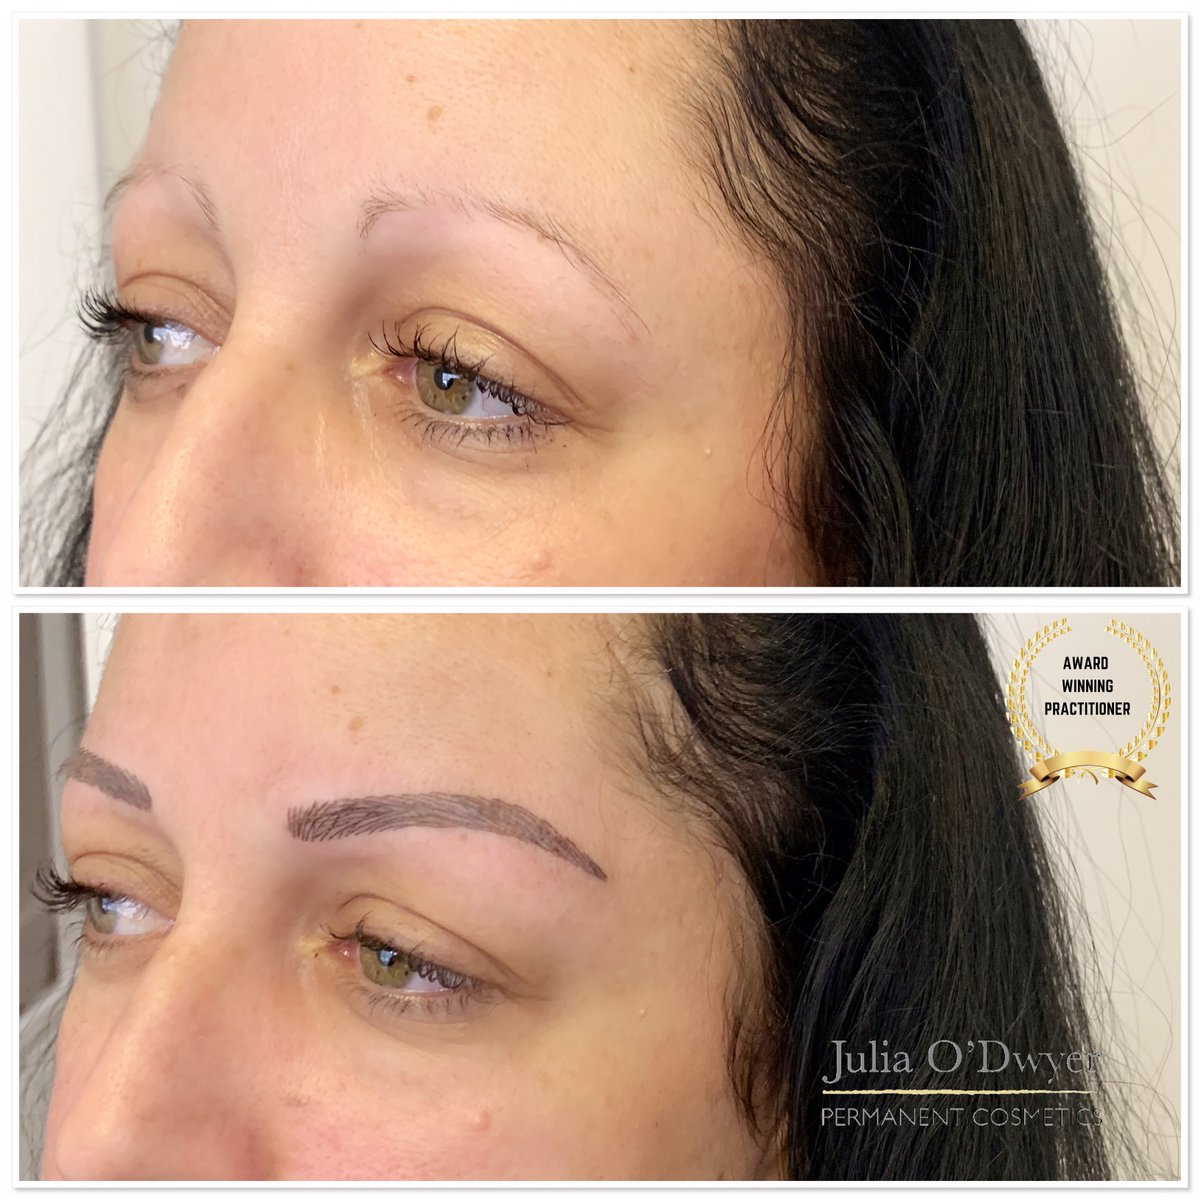 This client achieved her perfect permanent make-up. This brow is more visible but matches hair own hair colour. 
Book your permanent make-up treatment now

#redlodgebeautyclinic #permanentmakeup #permanentbrows #permanenteyeliner #hairstrokebrows #browsofinstagram #browsonfleek